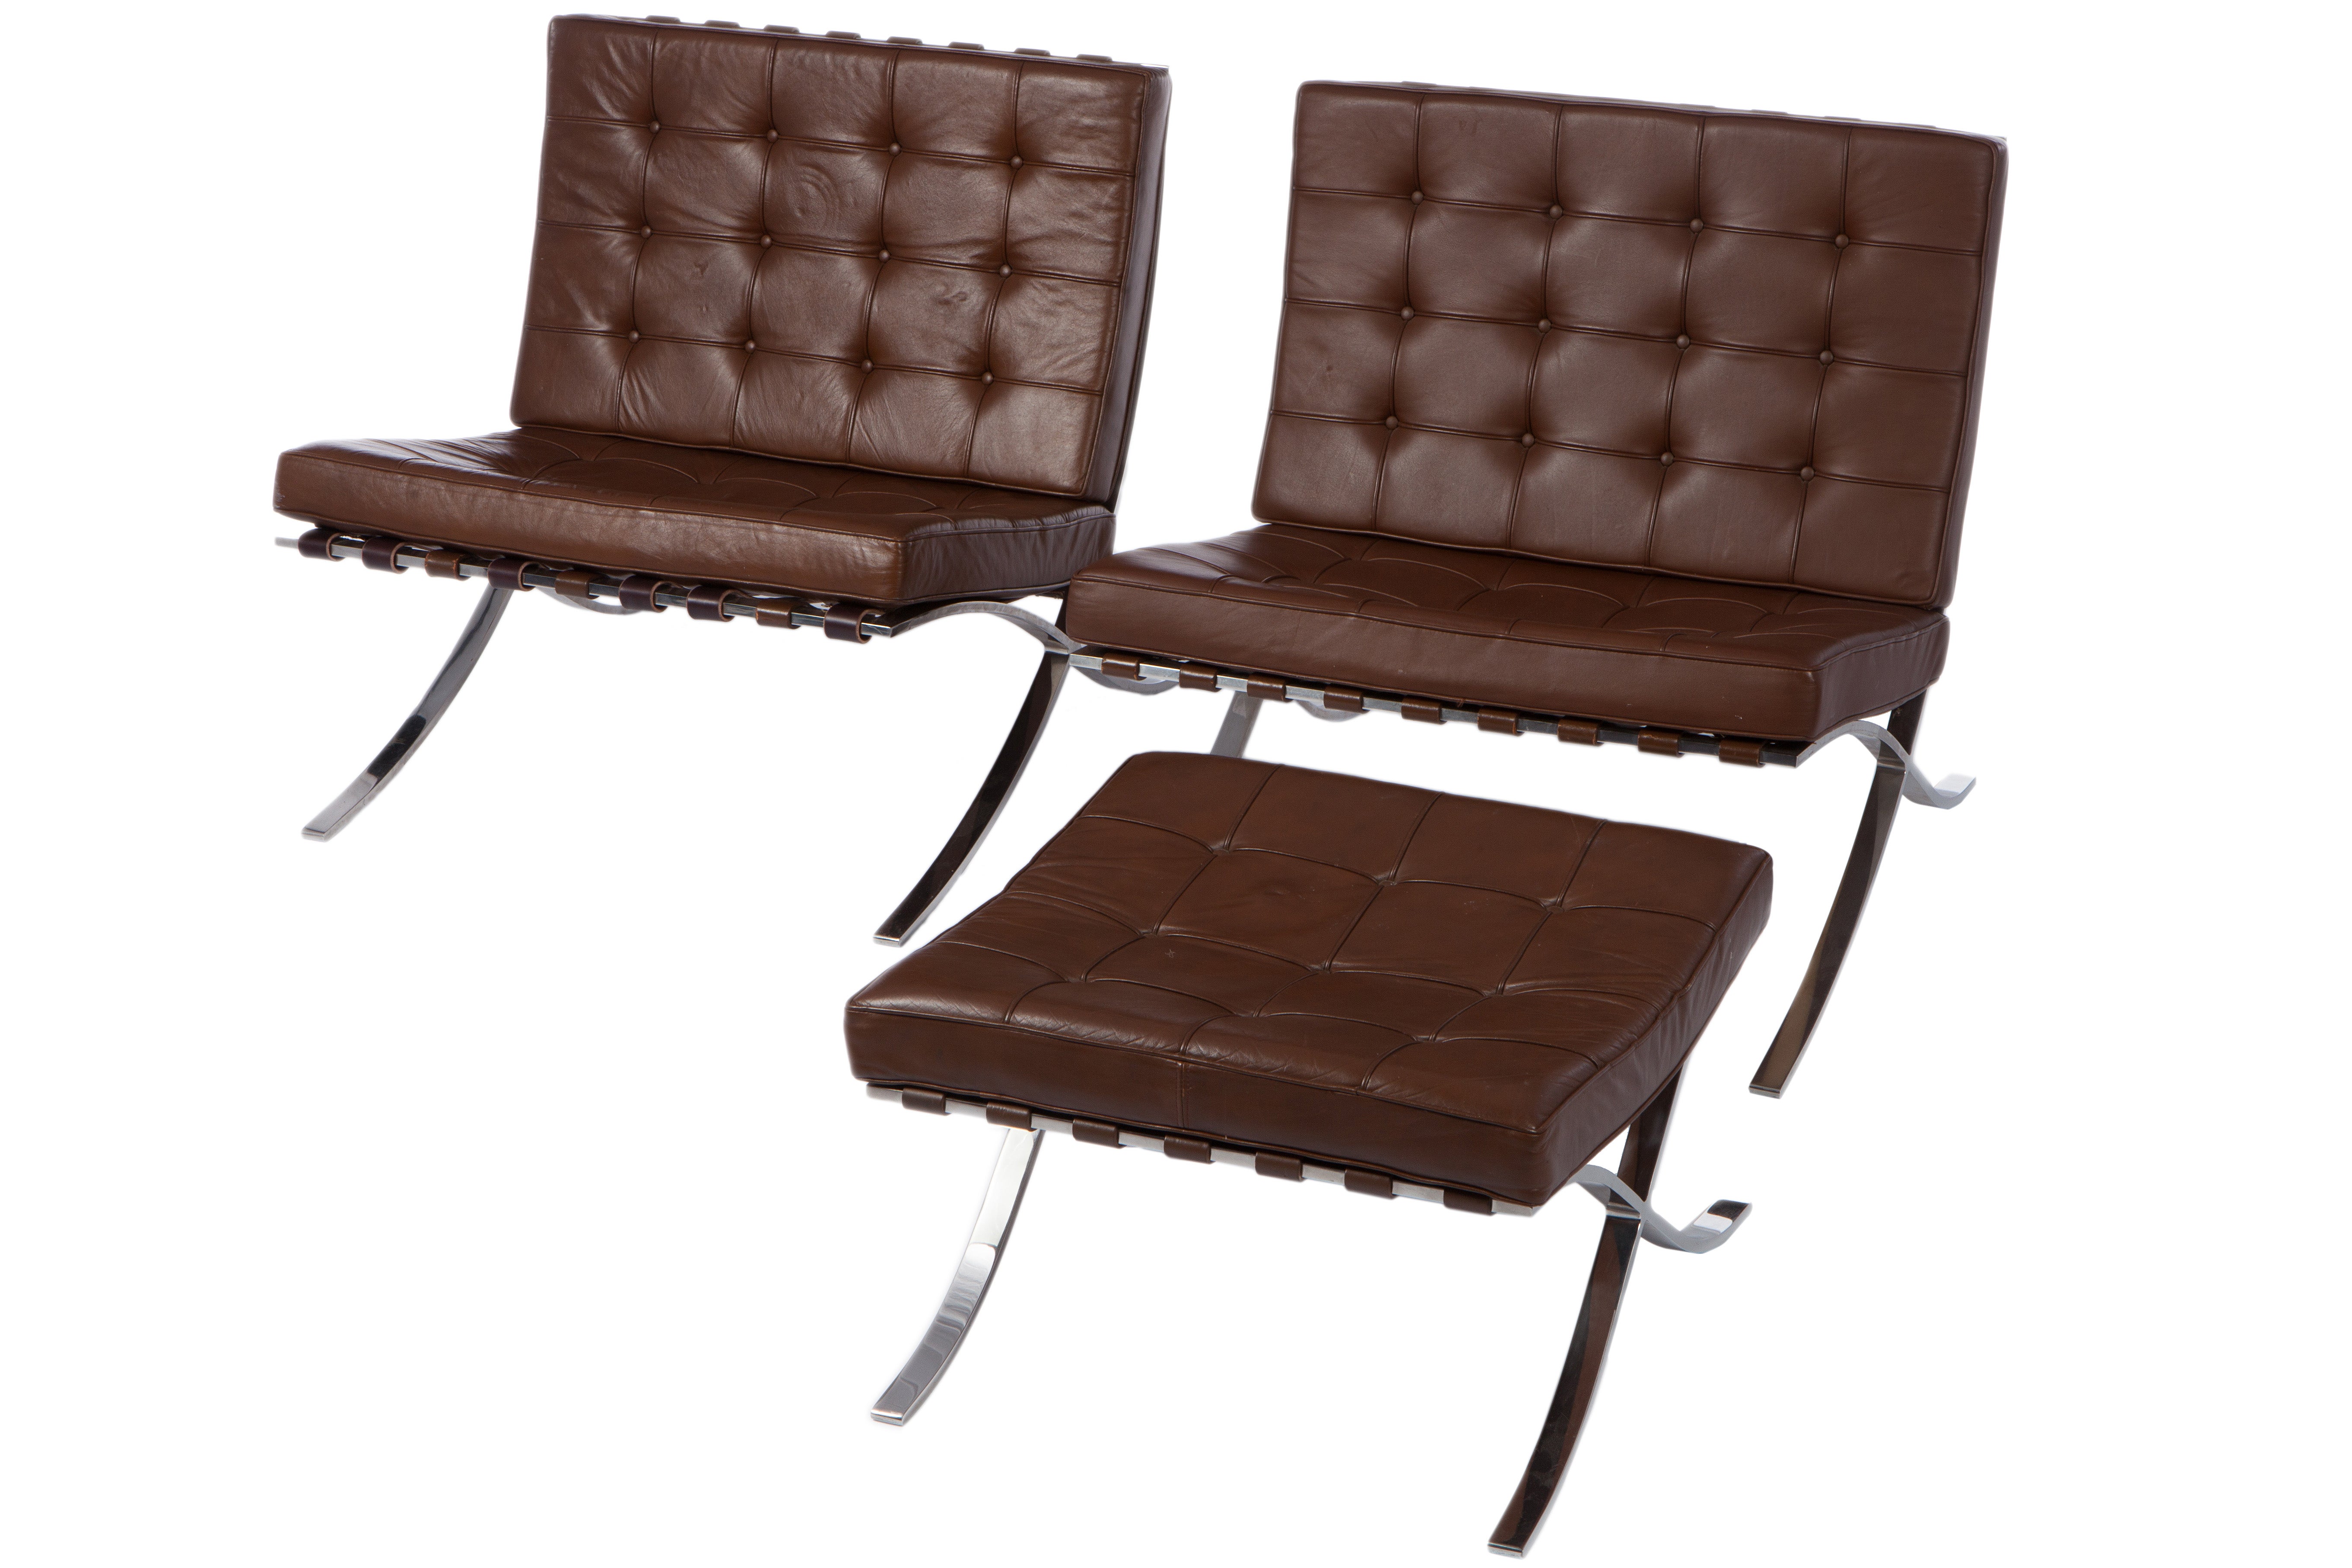  Barcelona Chairs by Ludwig Mies Van Der Rohe For Knoll